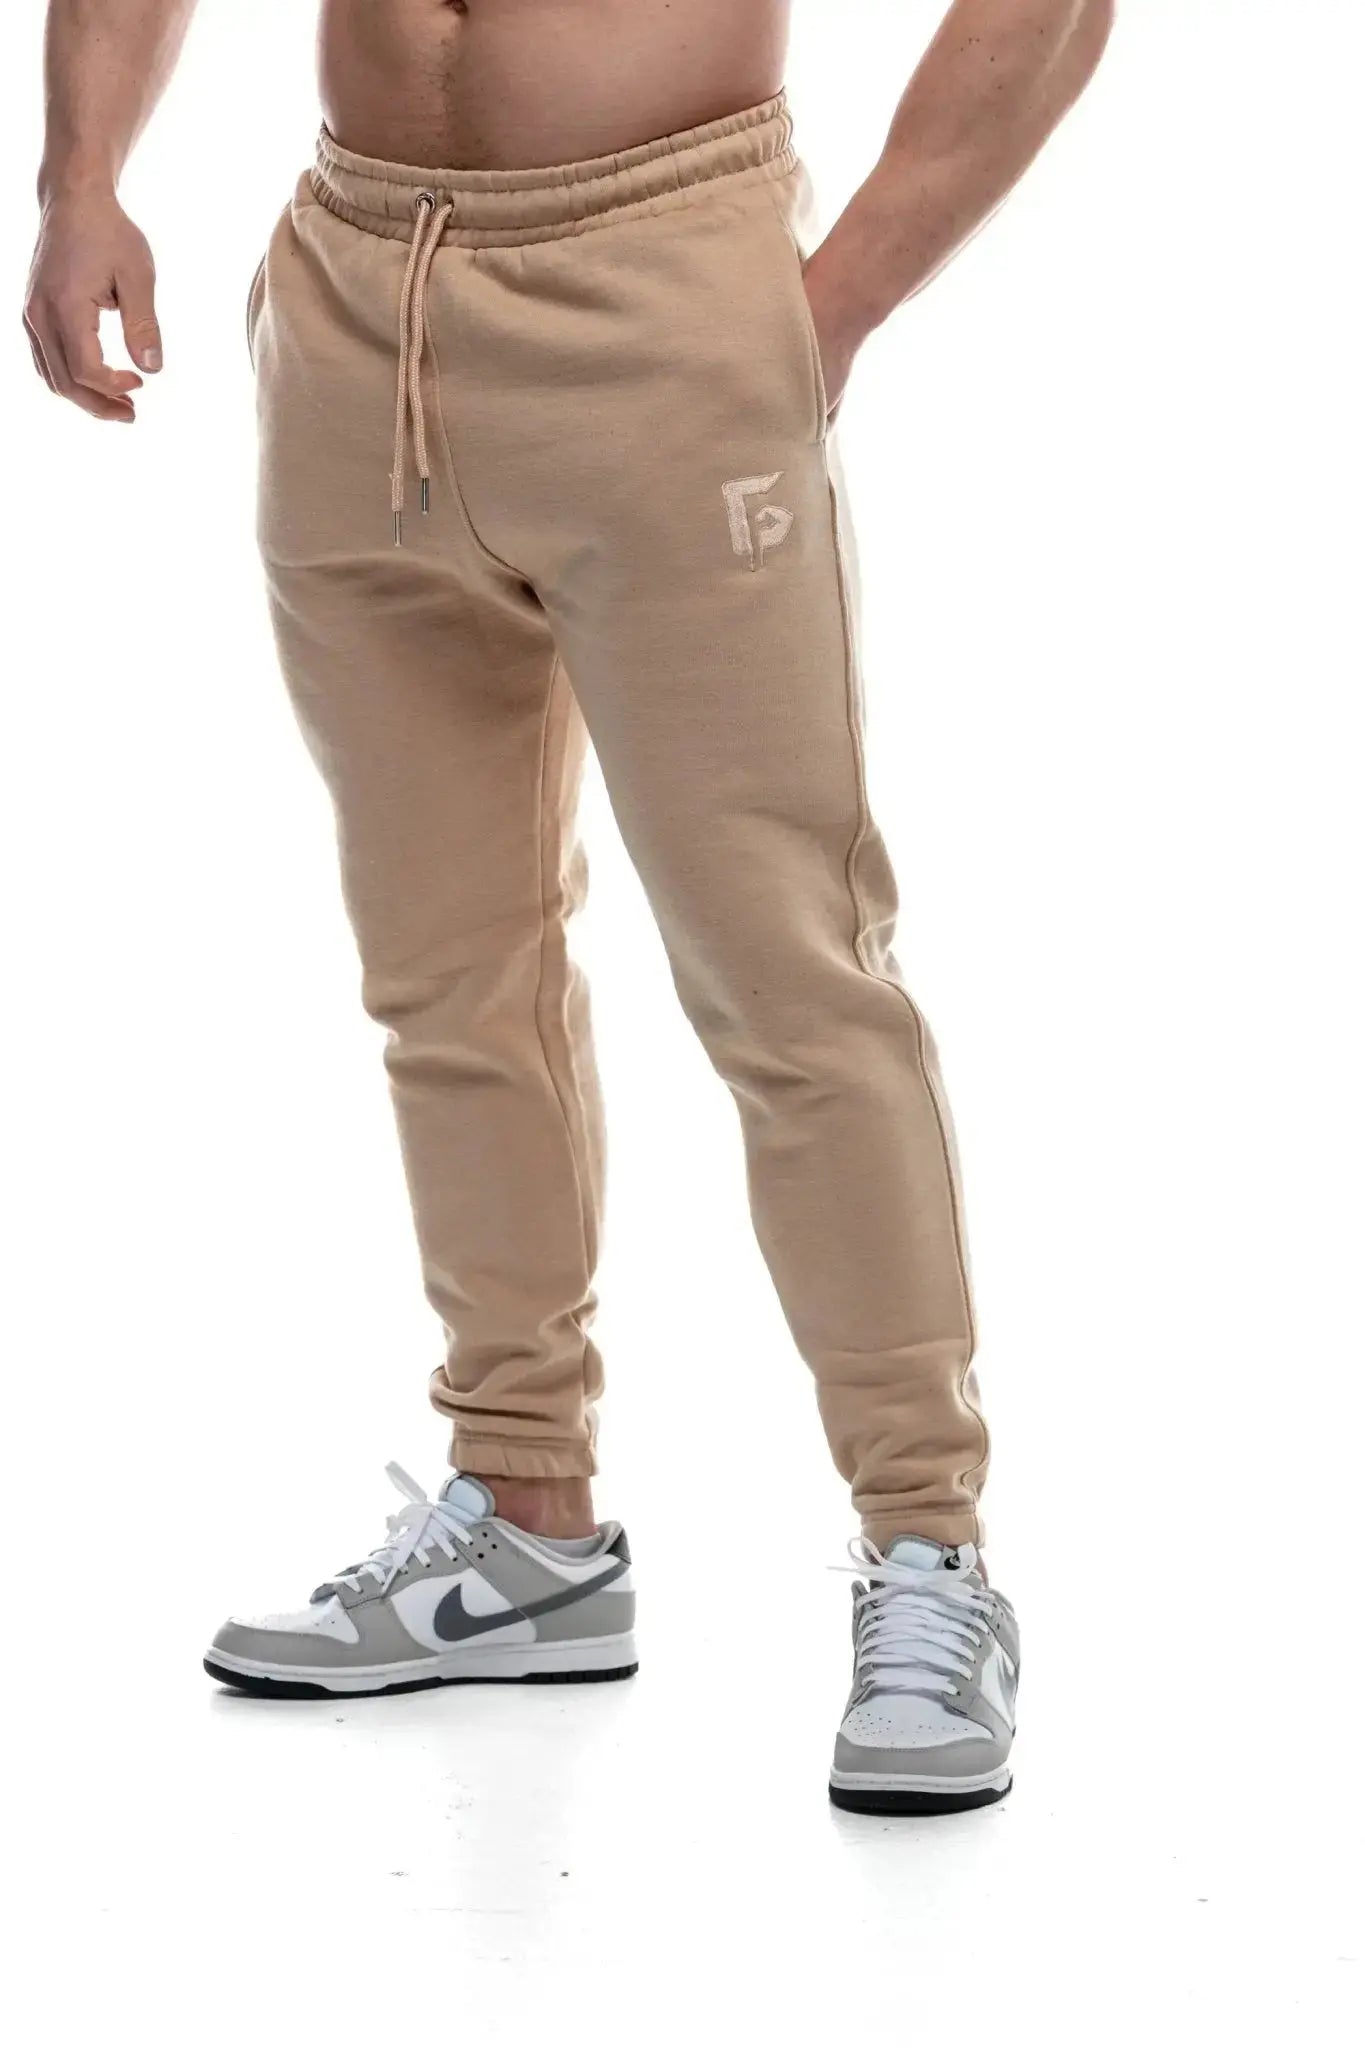 All in Motion™ Men's Ponte Jogger Pant - Light Beige Sand - Size Small